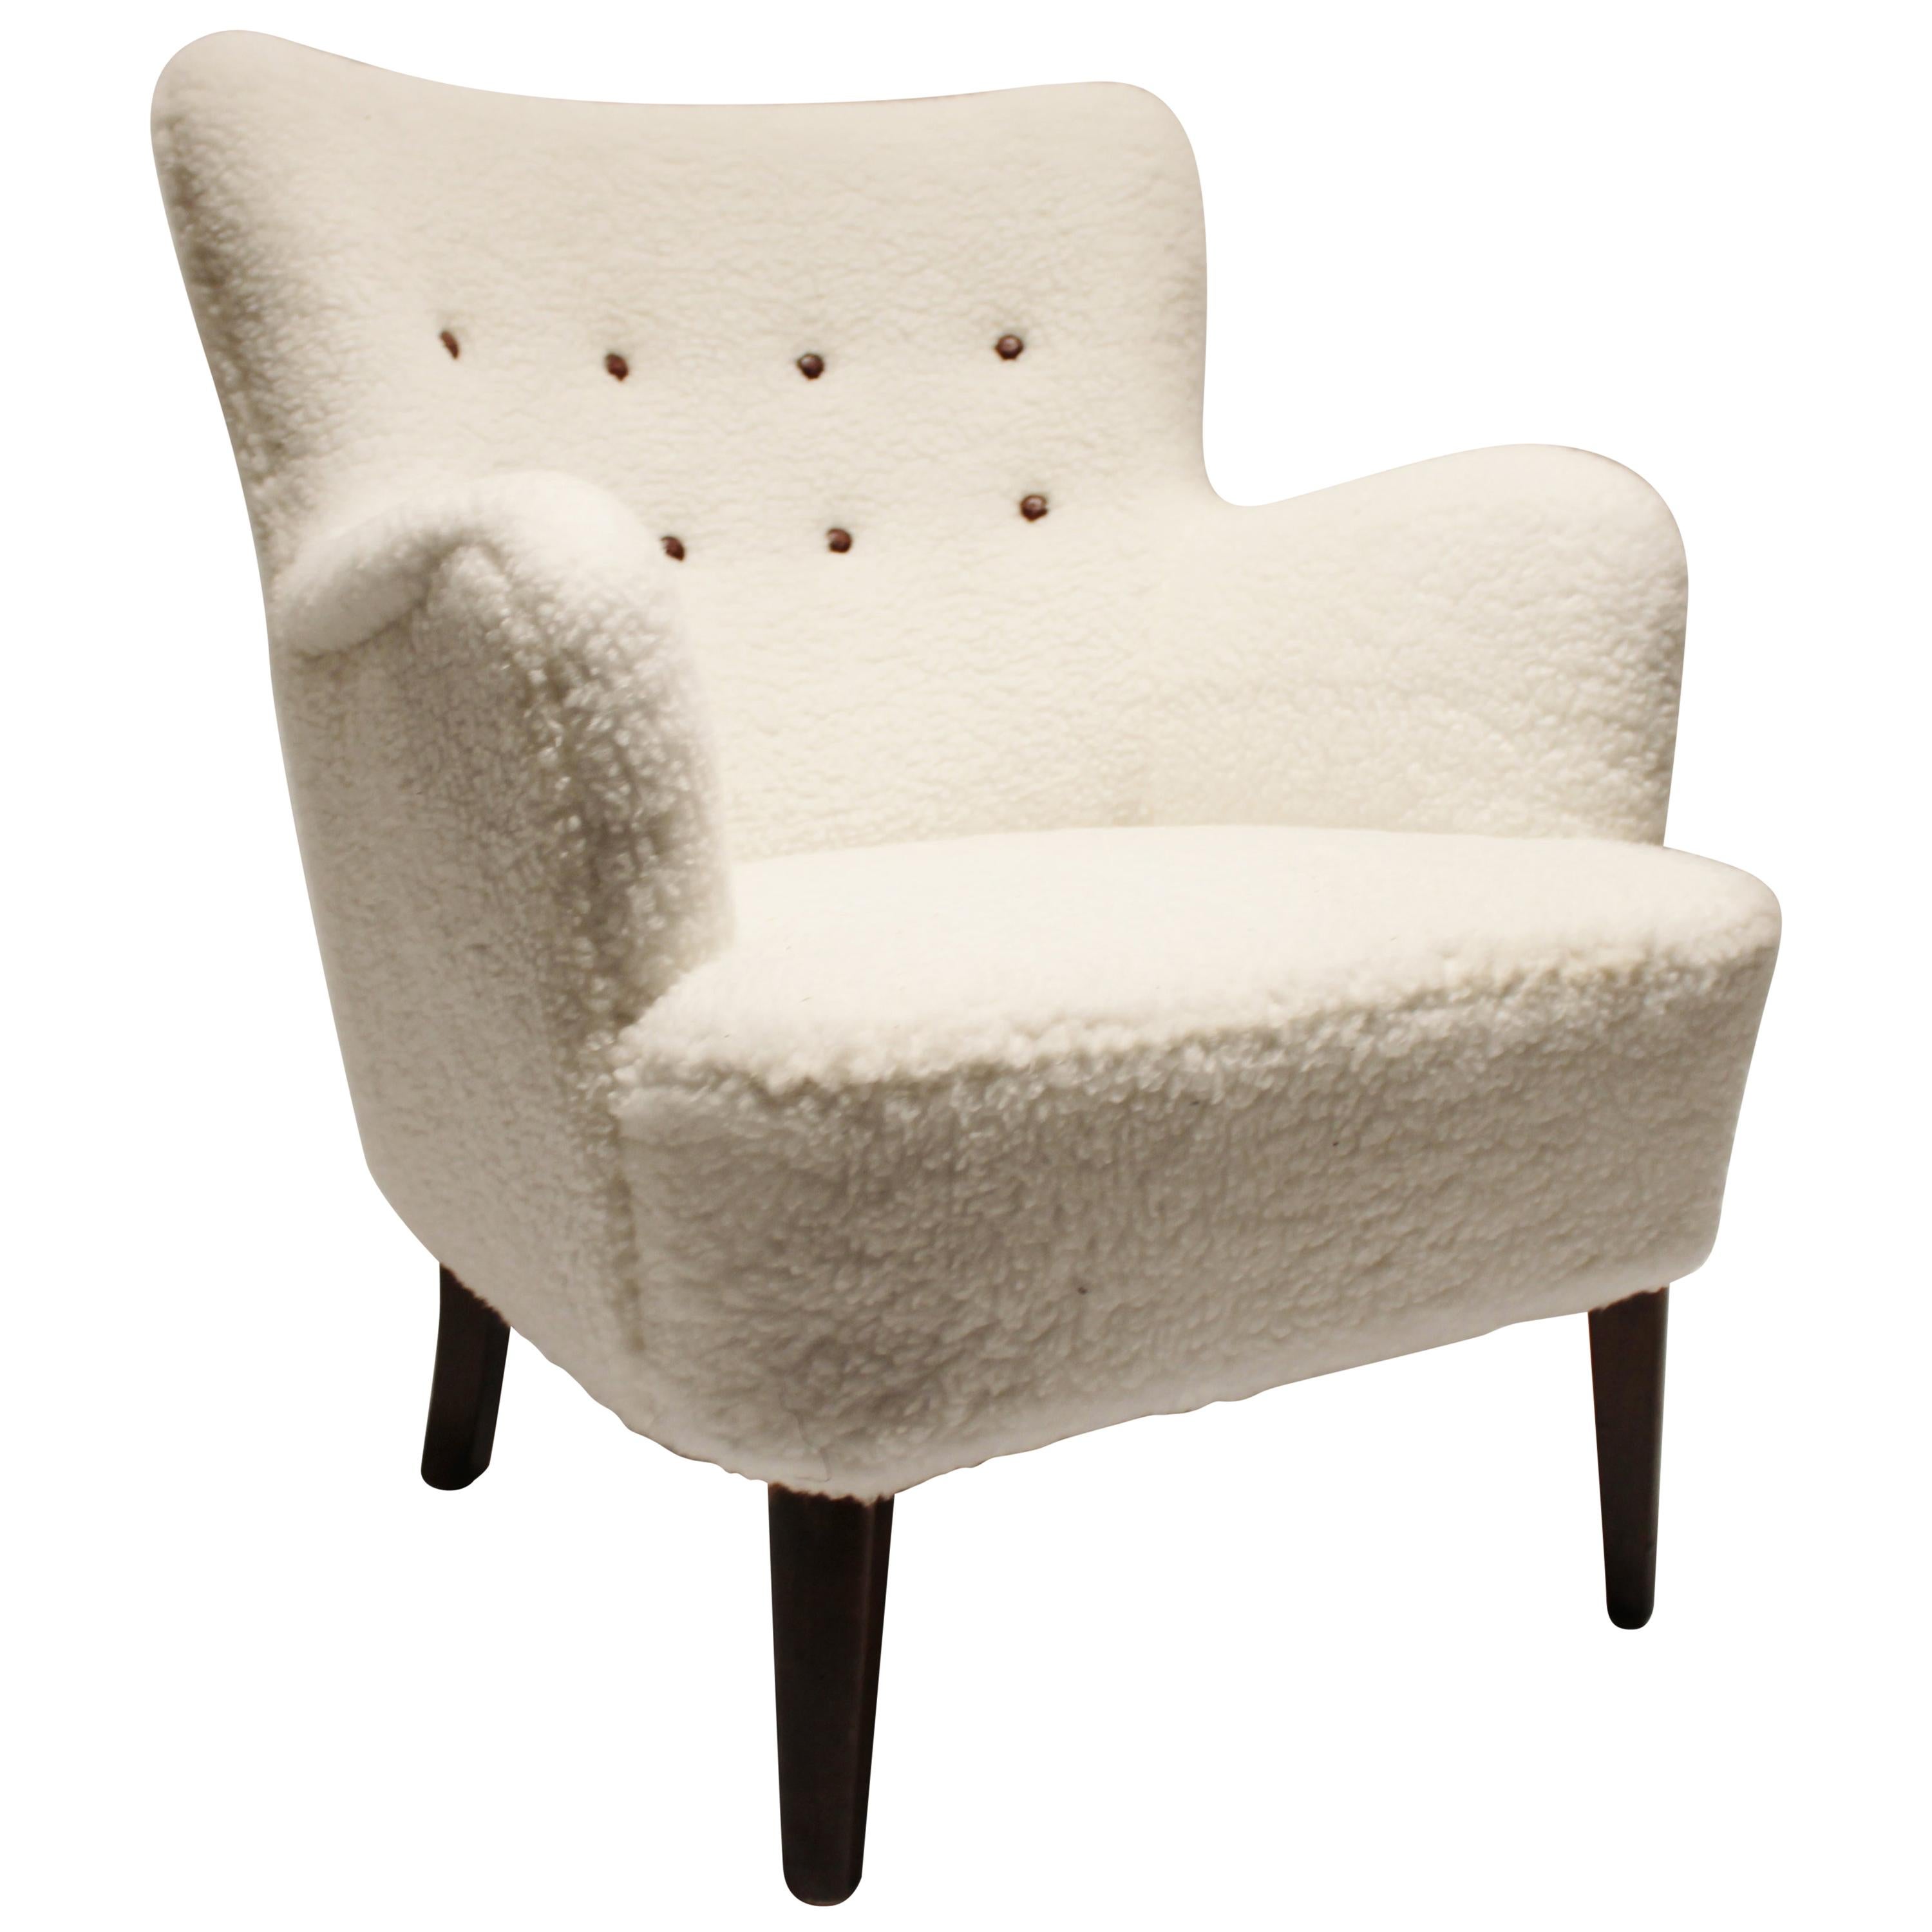 Lounge Chair Upholstered with White Wool Fabric and Leather Buttons, 1930s